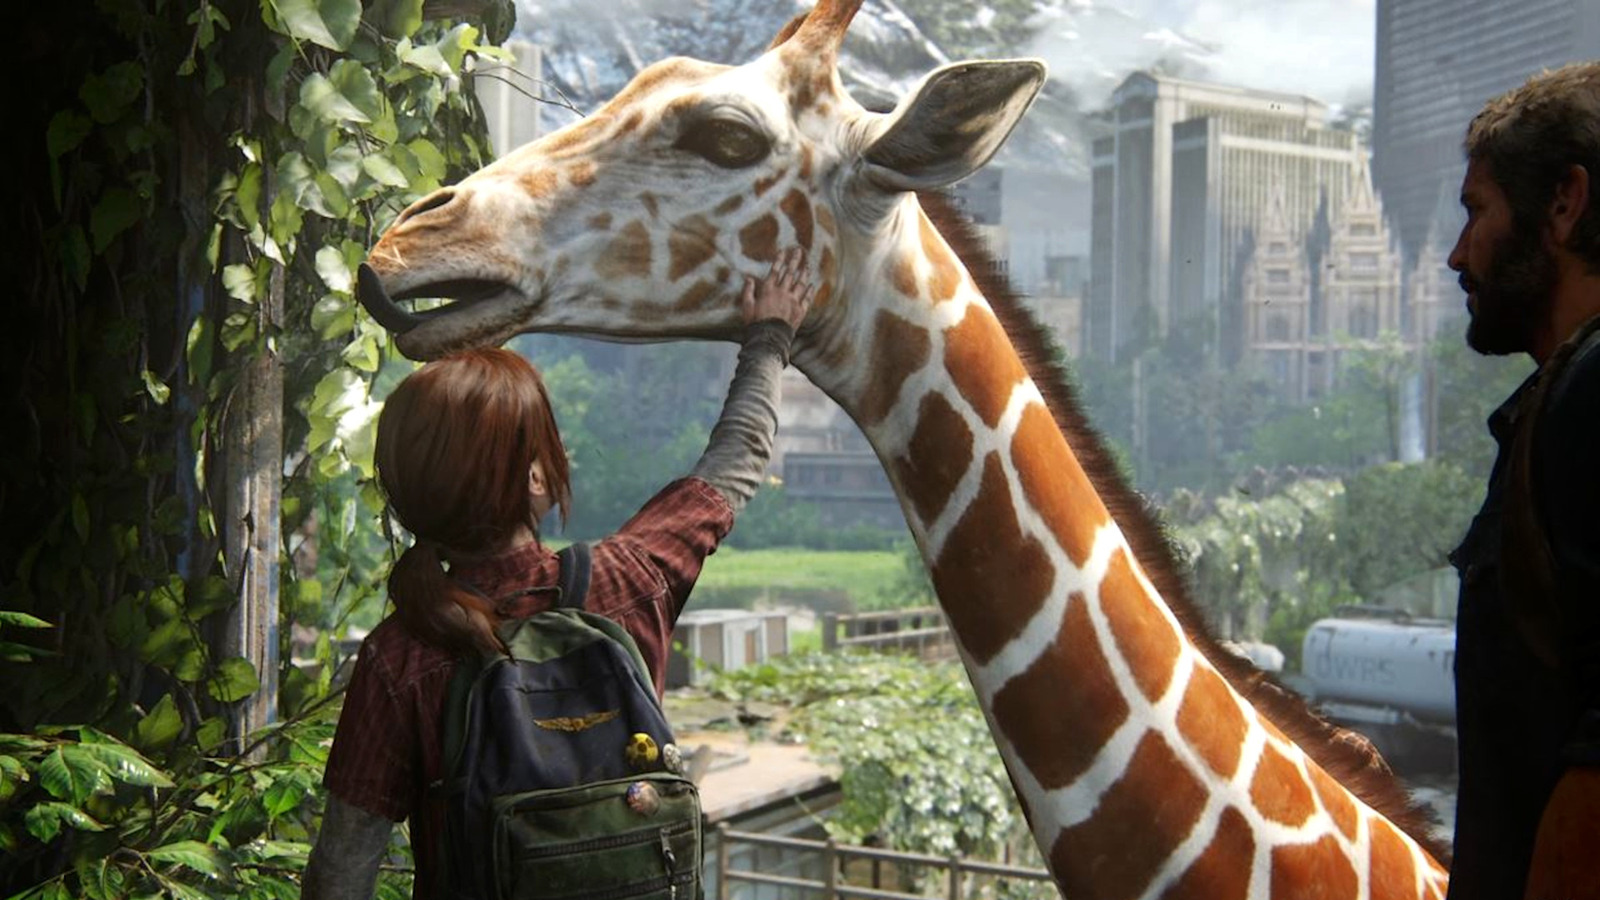 HBO's The Last of Us dawns a new chapter in video game adaptations